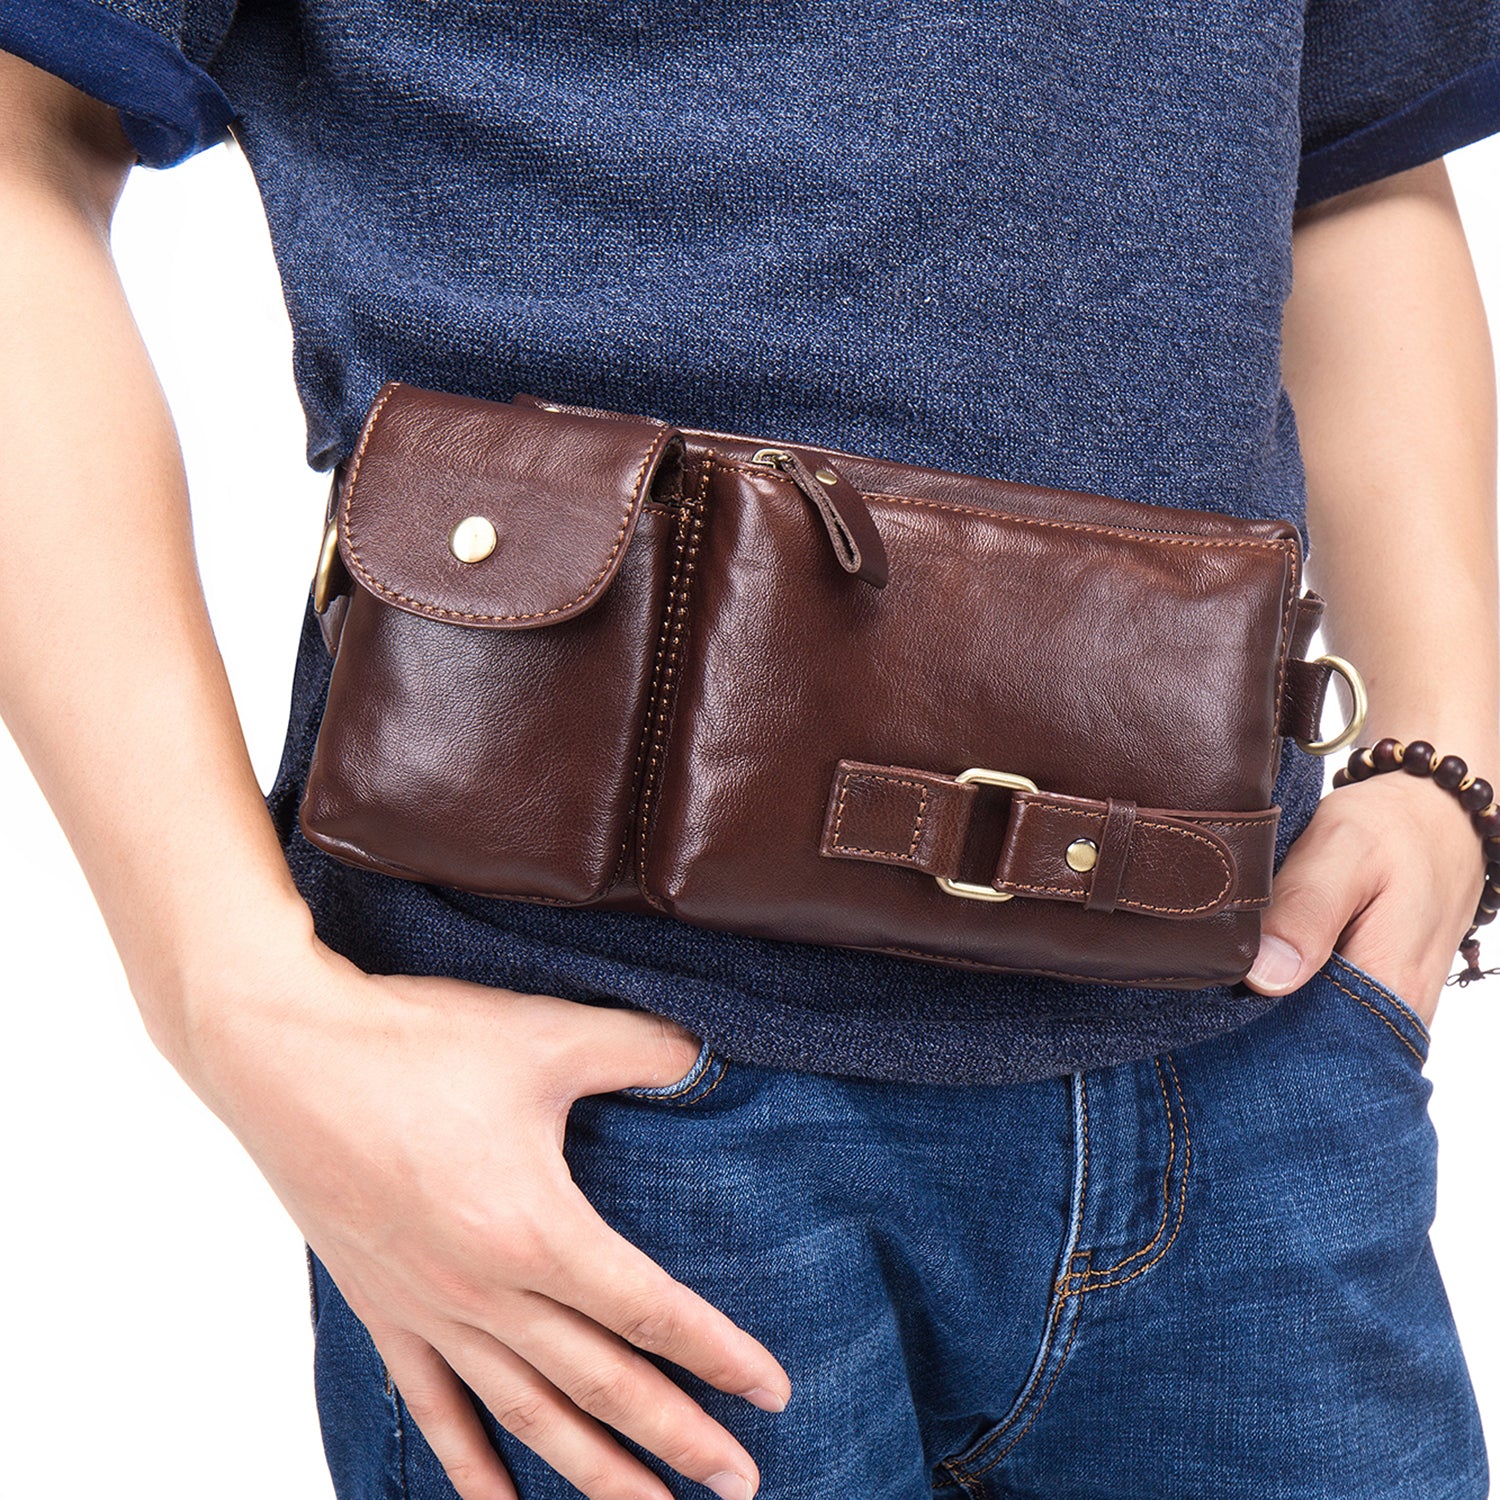 BULLCAPTAIN Genuine Leather Waist Packs Fanny Pack Belt Bag Phone leather Pouch Bags Travel Waist Pack Male Functional Wa - ebowsos